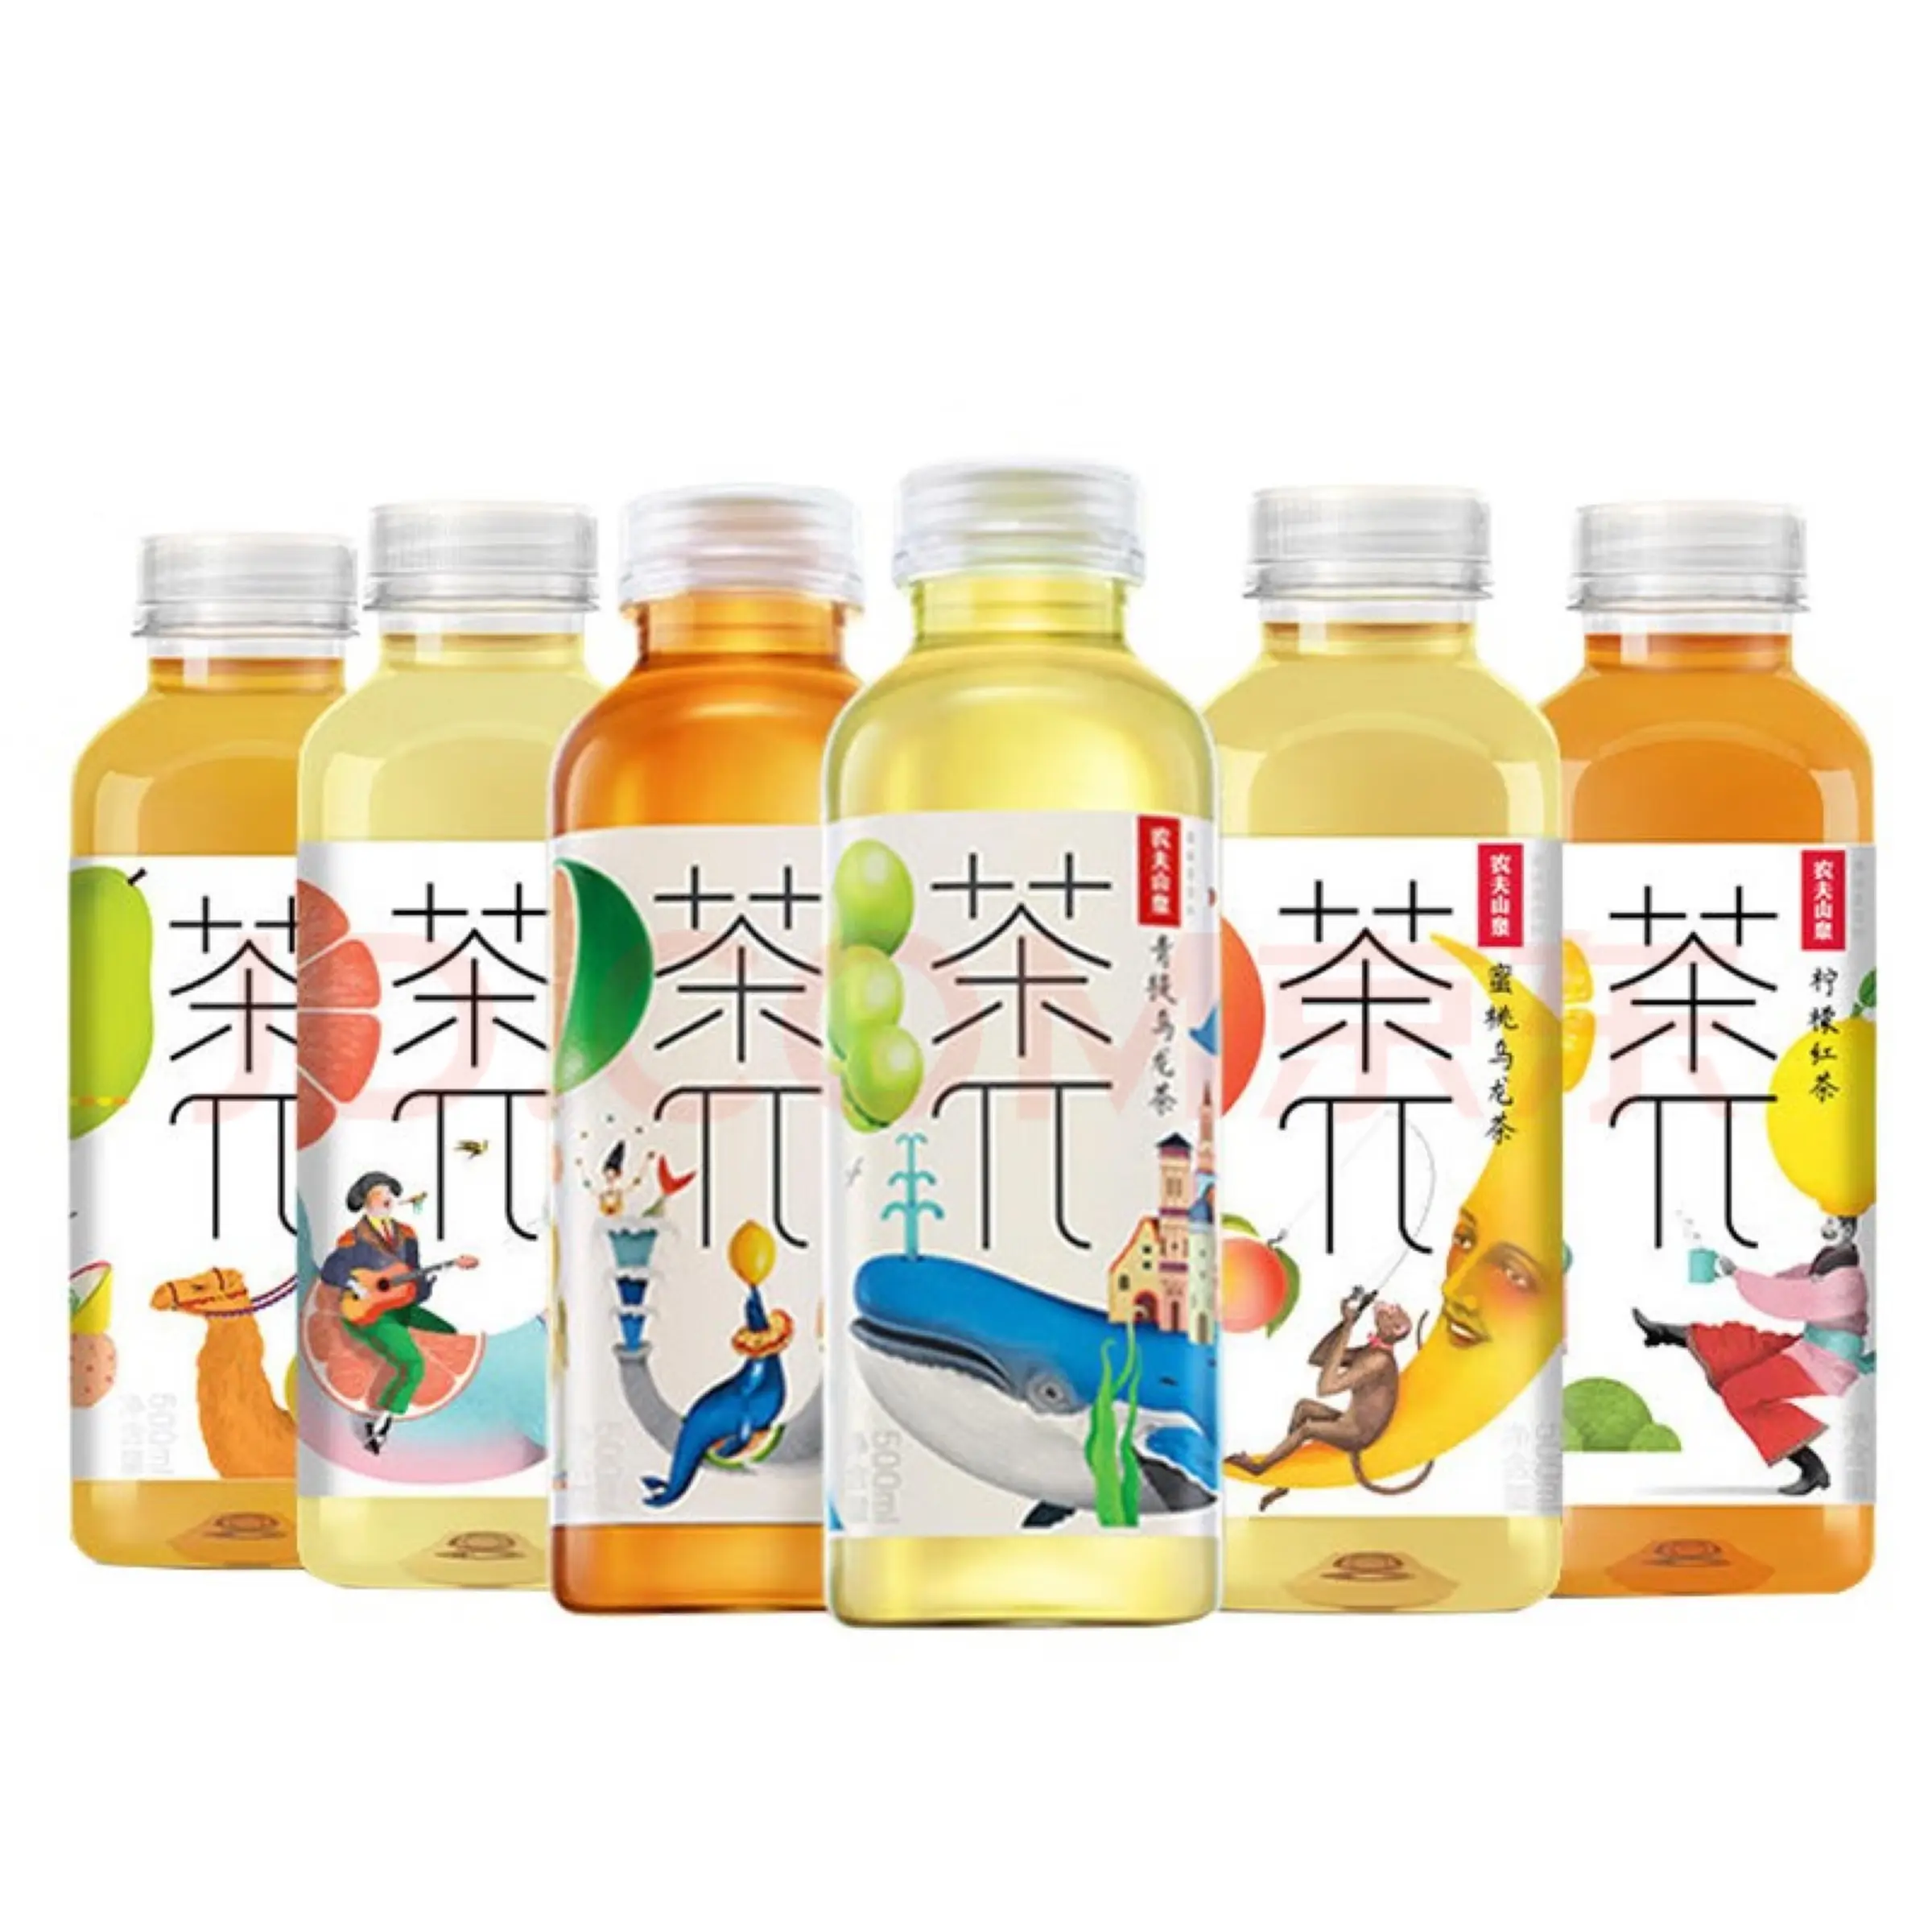 Factory Direct Nongfu Spring Peach Oolong Mixed Juice Drinks And Beverages